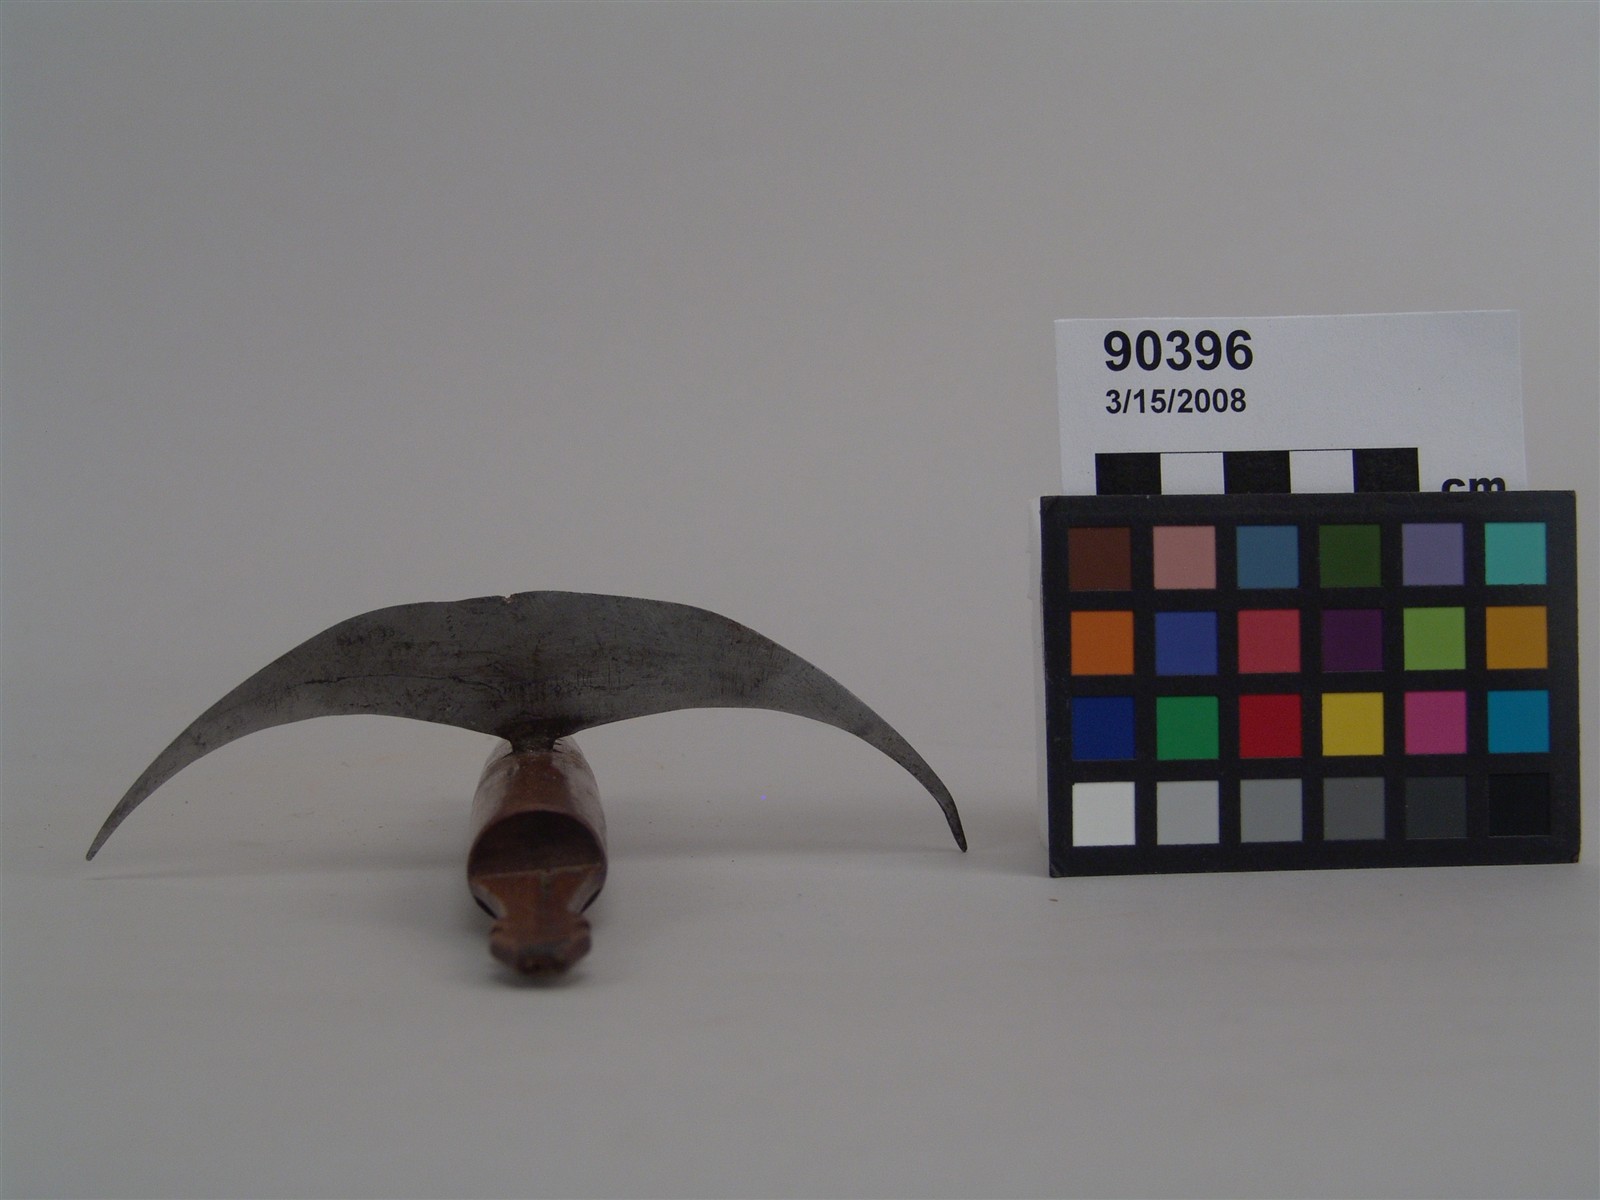 blade face finial end side (c) Field Museum of Natural History - CC BY-NC 4.0